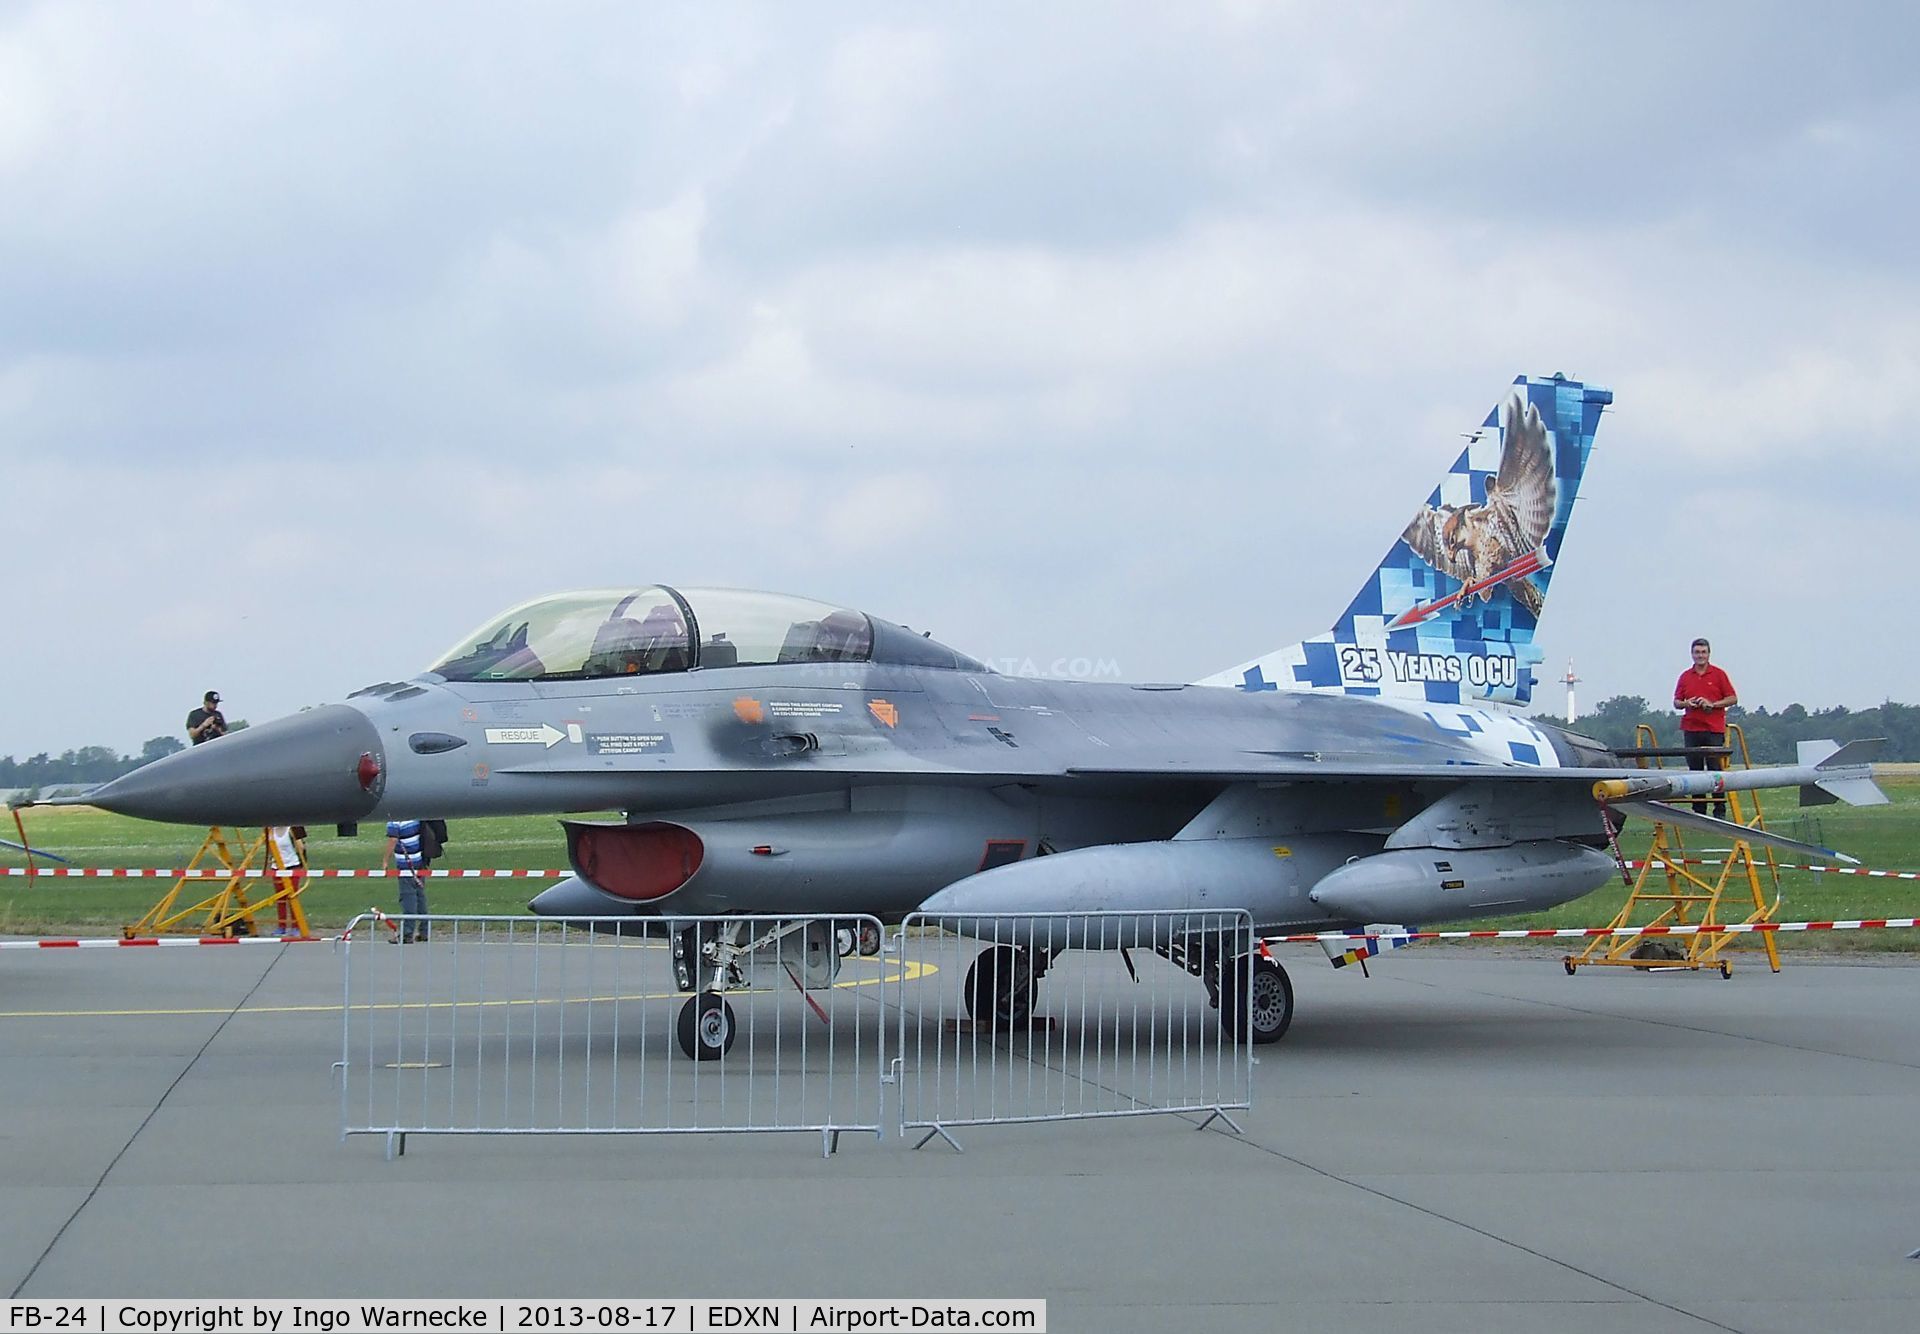 FB-24, General Dynamics F-16BM Fighting Falcon C/N 6J-24, General Dynamics (SABCA) F-16BM Fighting Falcon of the FAeB (Belgian Air Force) in '25 years OCU' special colours at the Spottersday of the Nordholz Airday 2013 celebrationg 100 Years of German Naval Aviation at Nordholz Naval Aviation Base